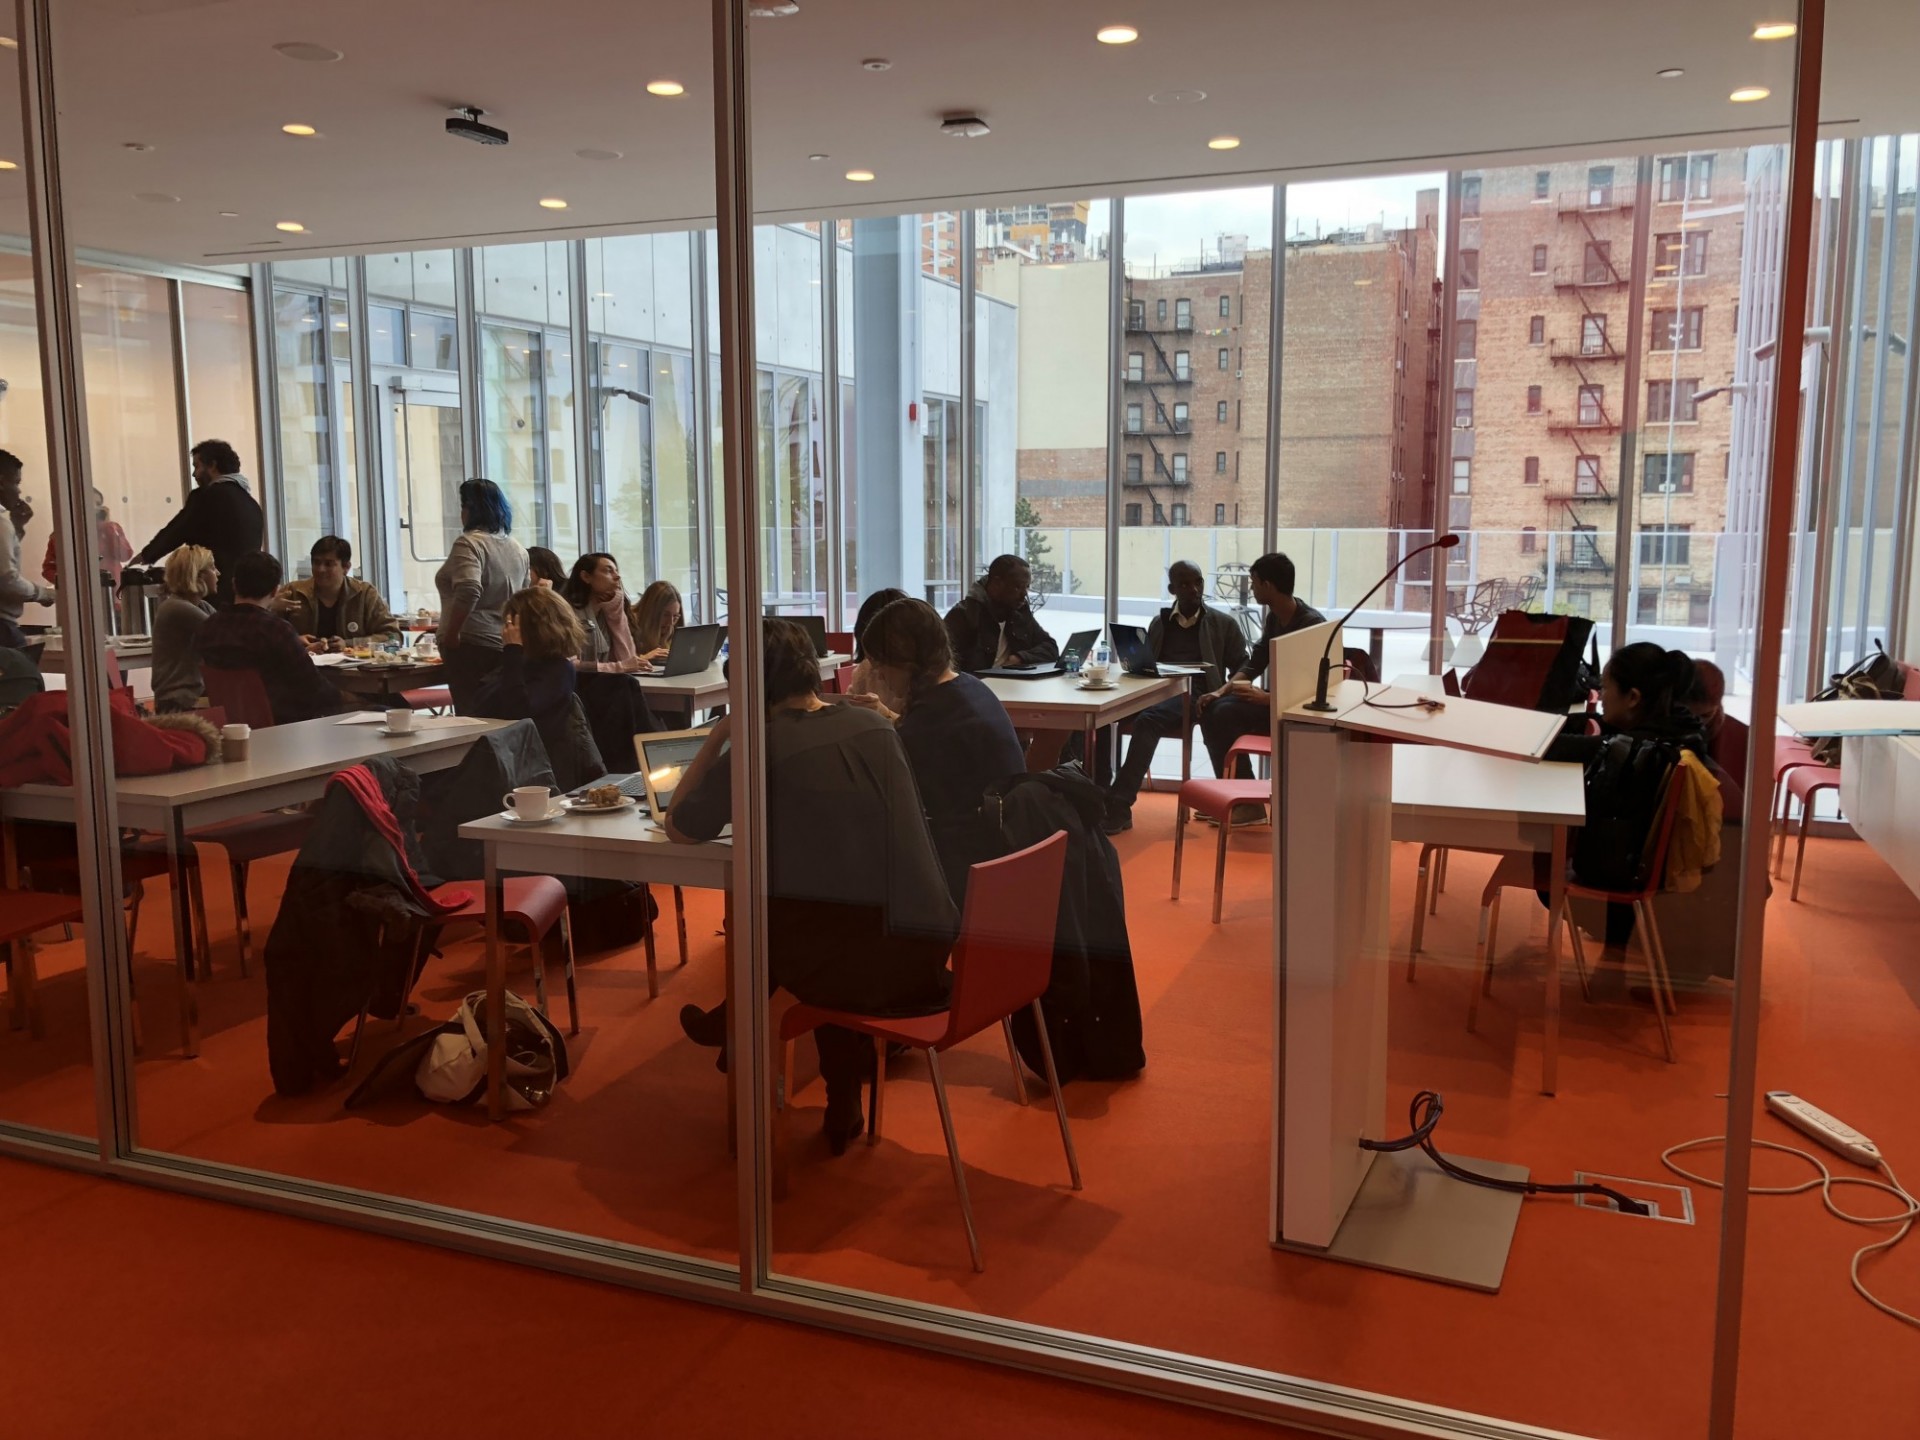 Event in The Forum's room 301. Groups of people sit in pairs, working around tables. 